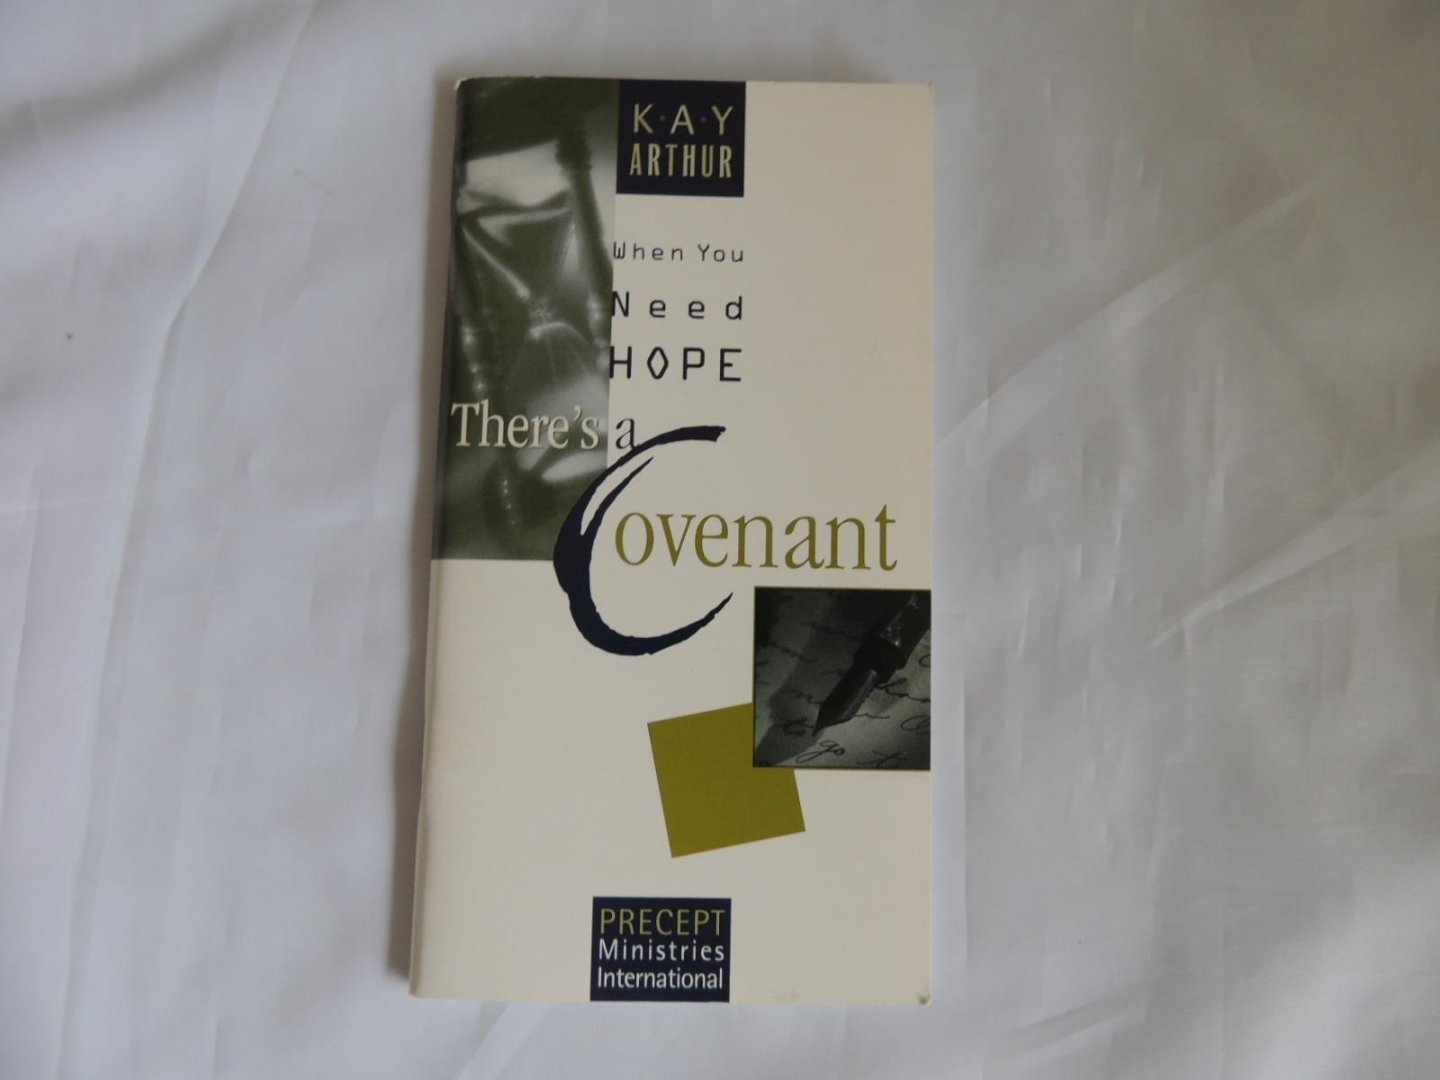 Arthur, Kay - When you need hope, there's a covenant